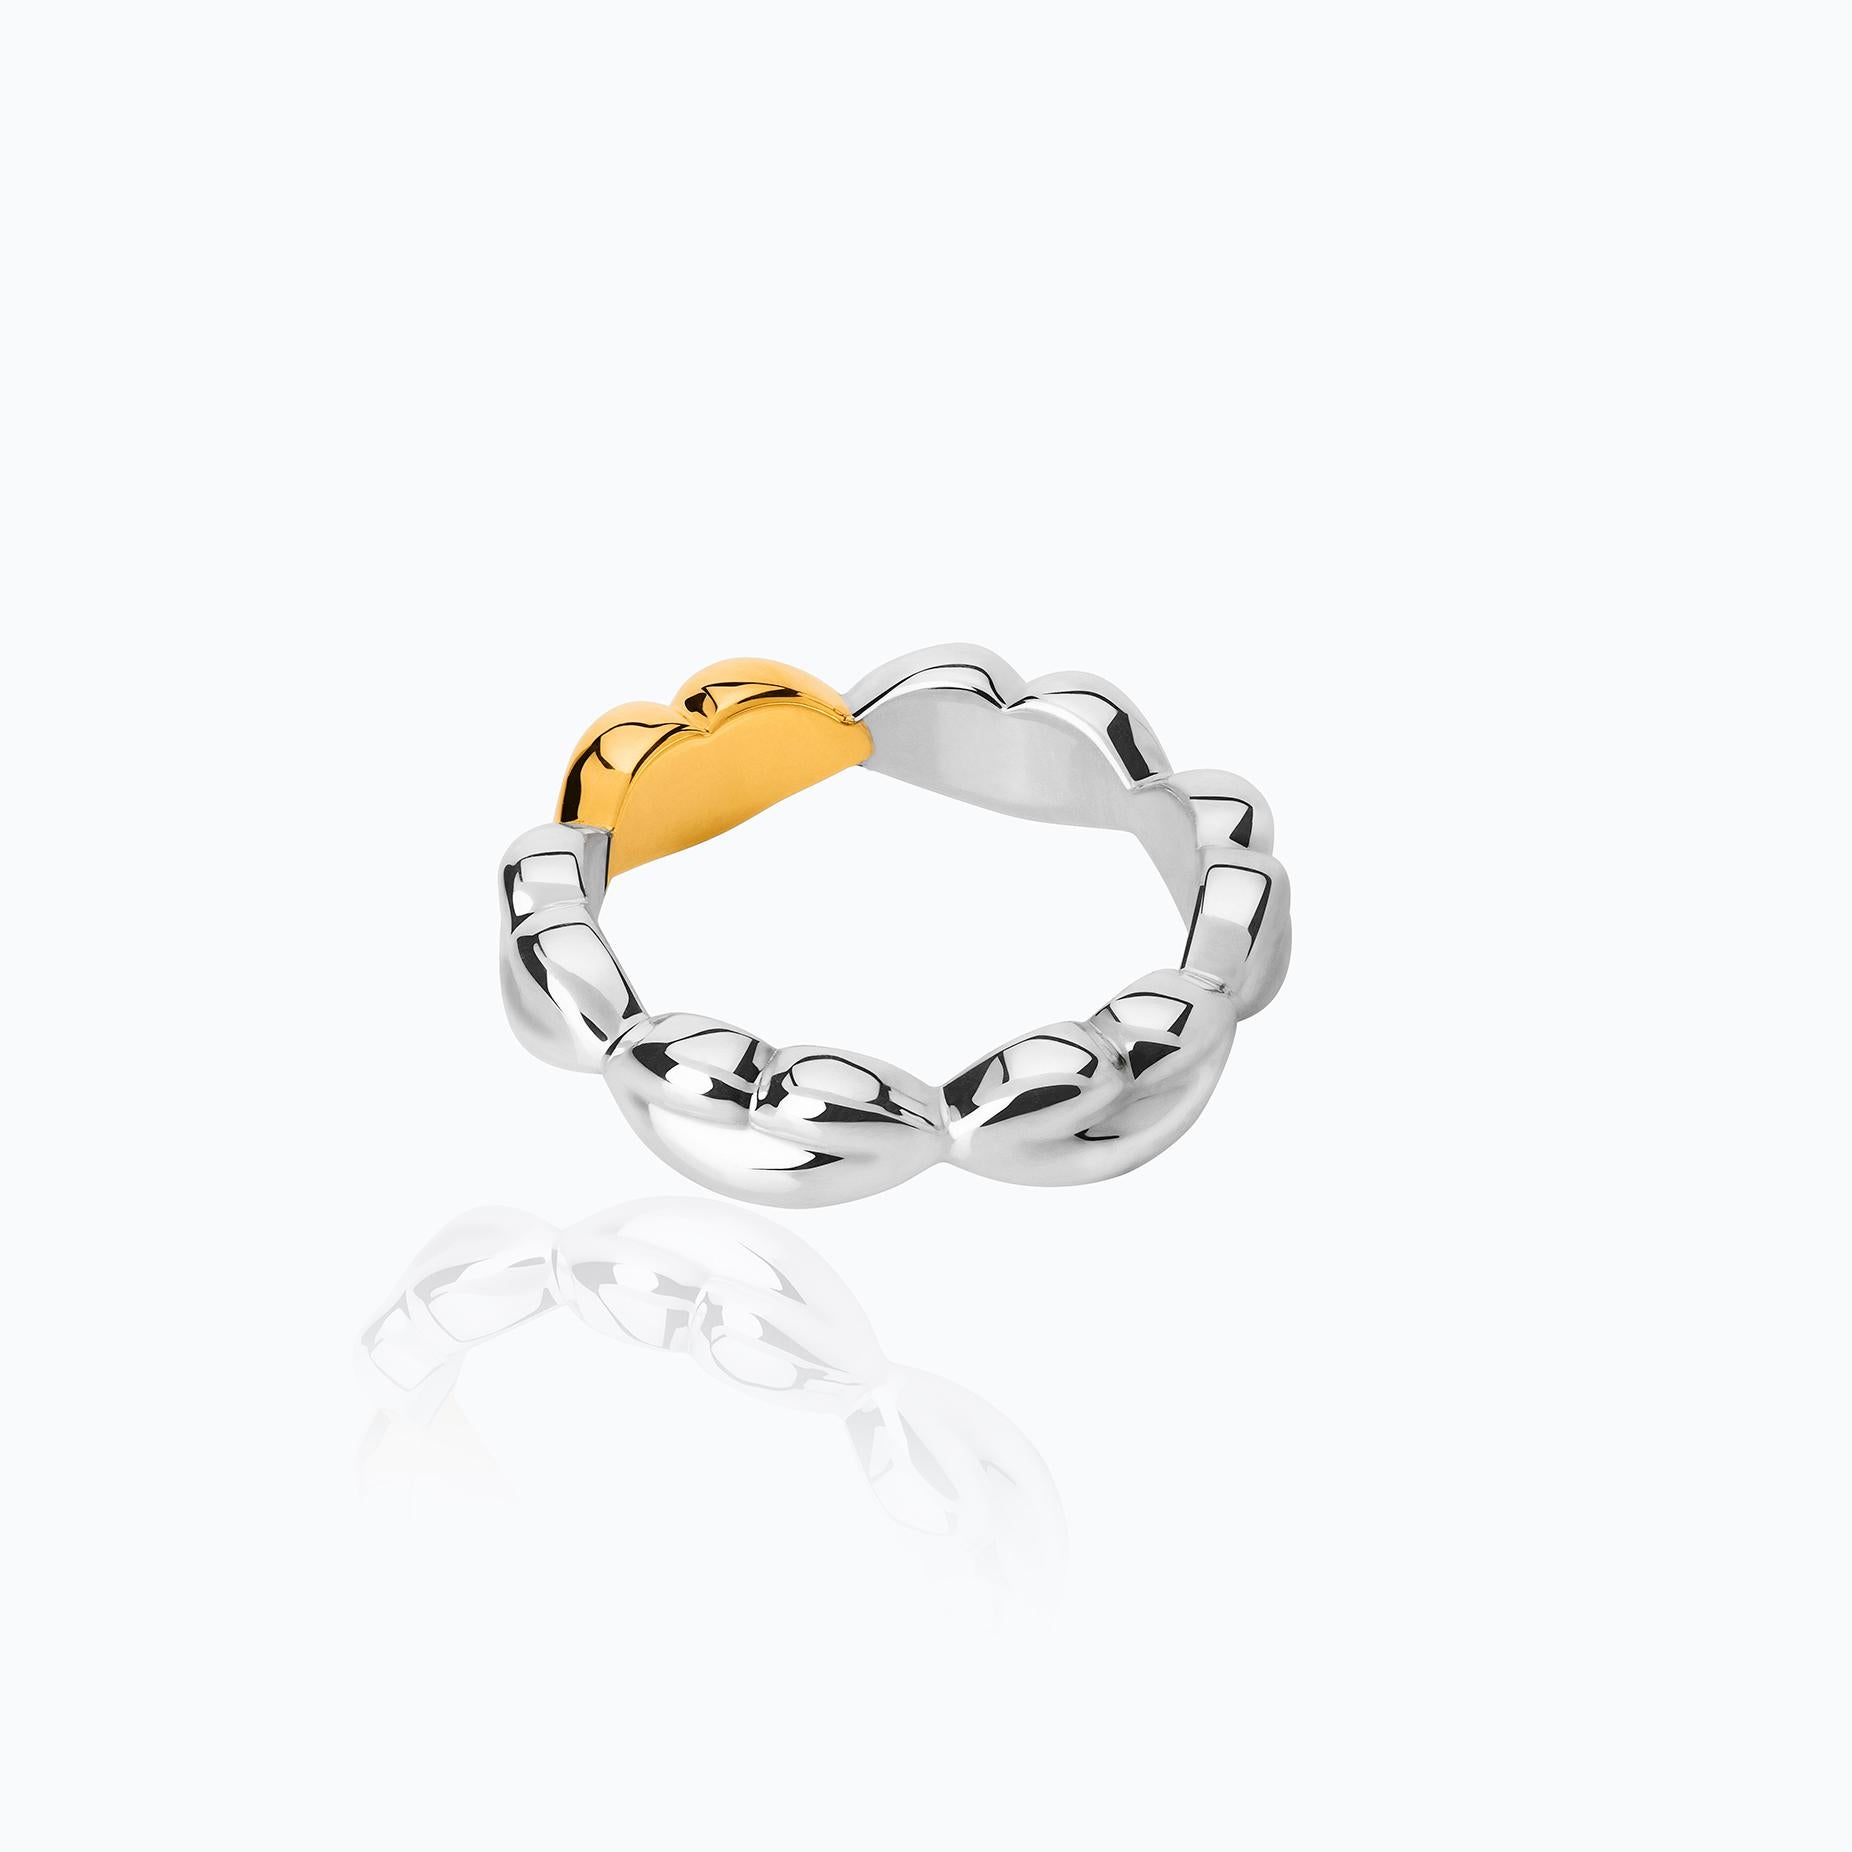 Sterling Silver With 23 Karat Yellow Gold Vermeil Bésame Texture Ring - Size 75 In New Condition For Sale In Mexico City, MX